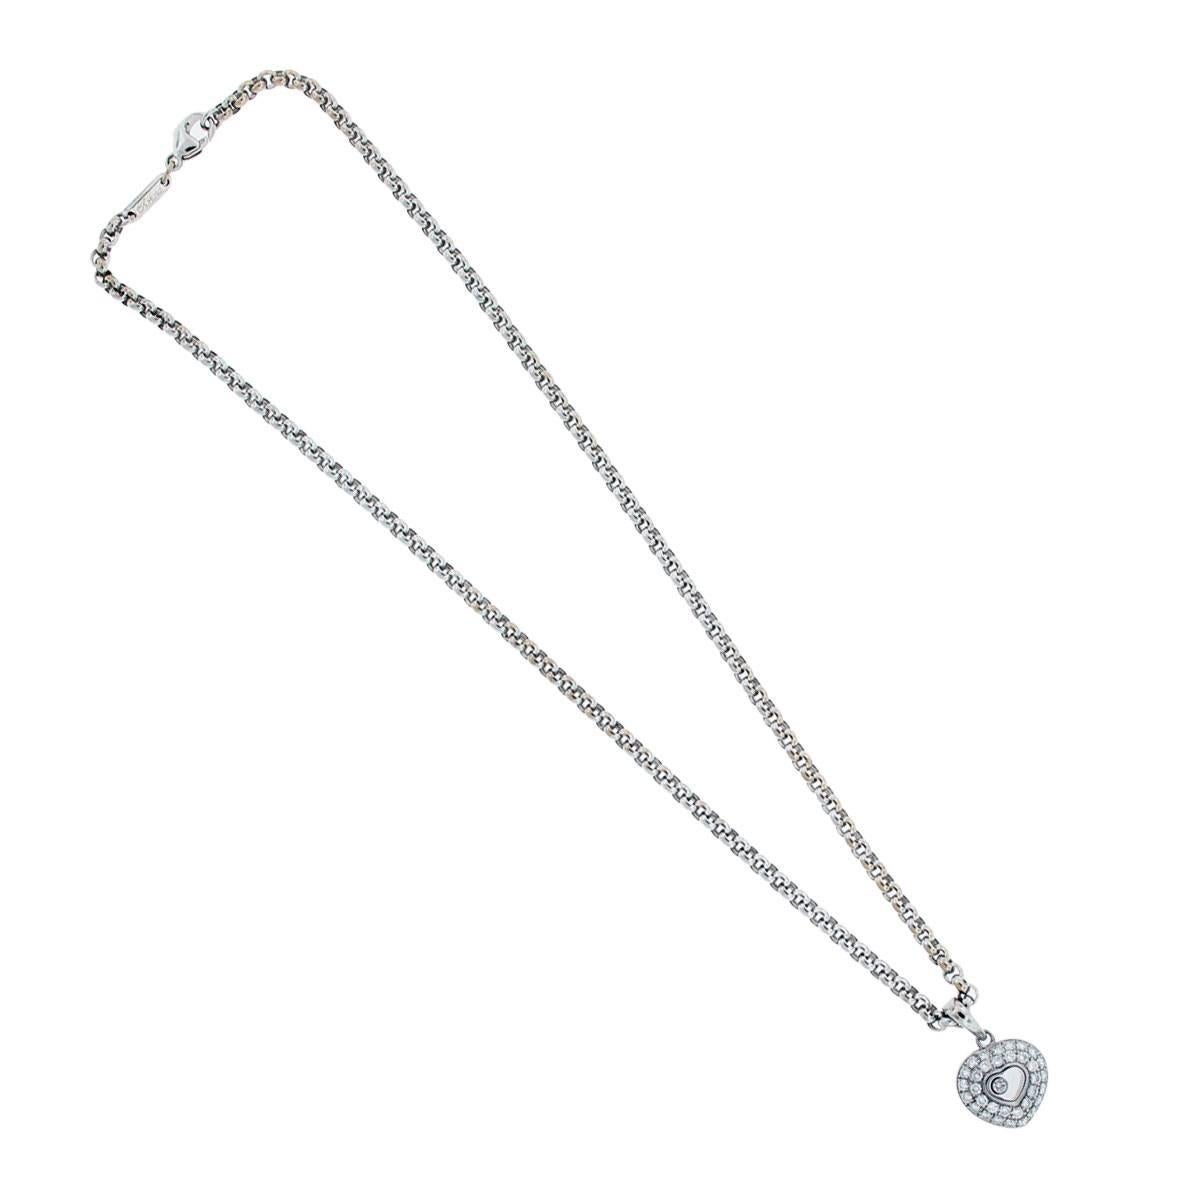 rand
Chopard
Style
18k White Gold Happy Diamond Heart Necklace
Material	18k White  Gold
Total Weight 
14.8dwt (22.9g)
Diamond Details
Approximately .66ctw of Diamonds, Diamonds are G in color and VS in clarity.
Necklace Length
Chain is